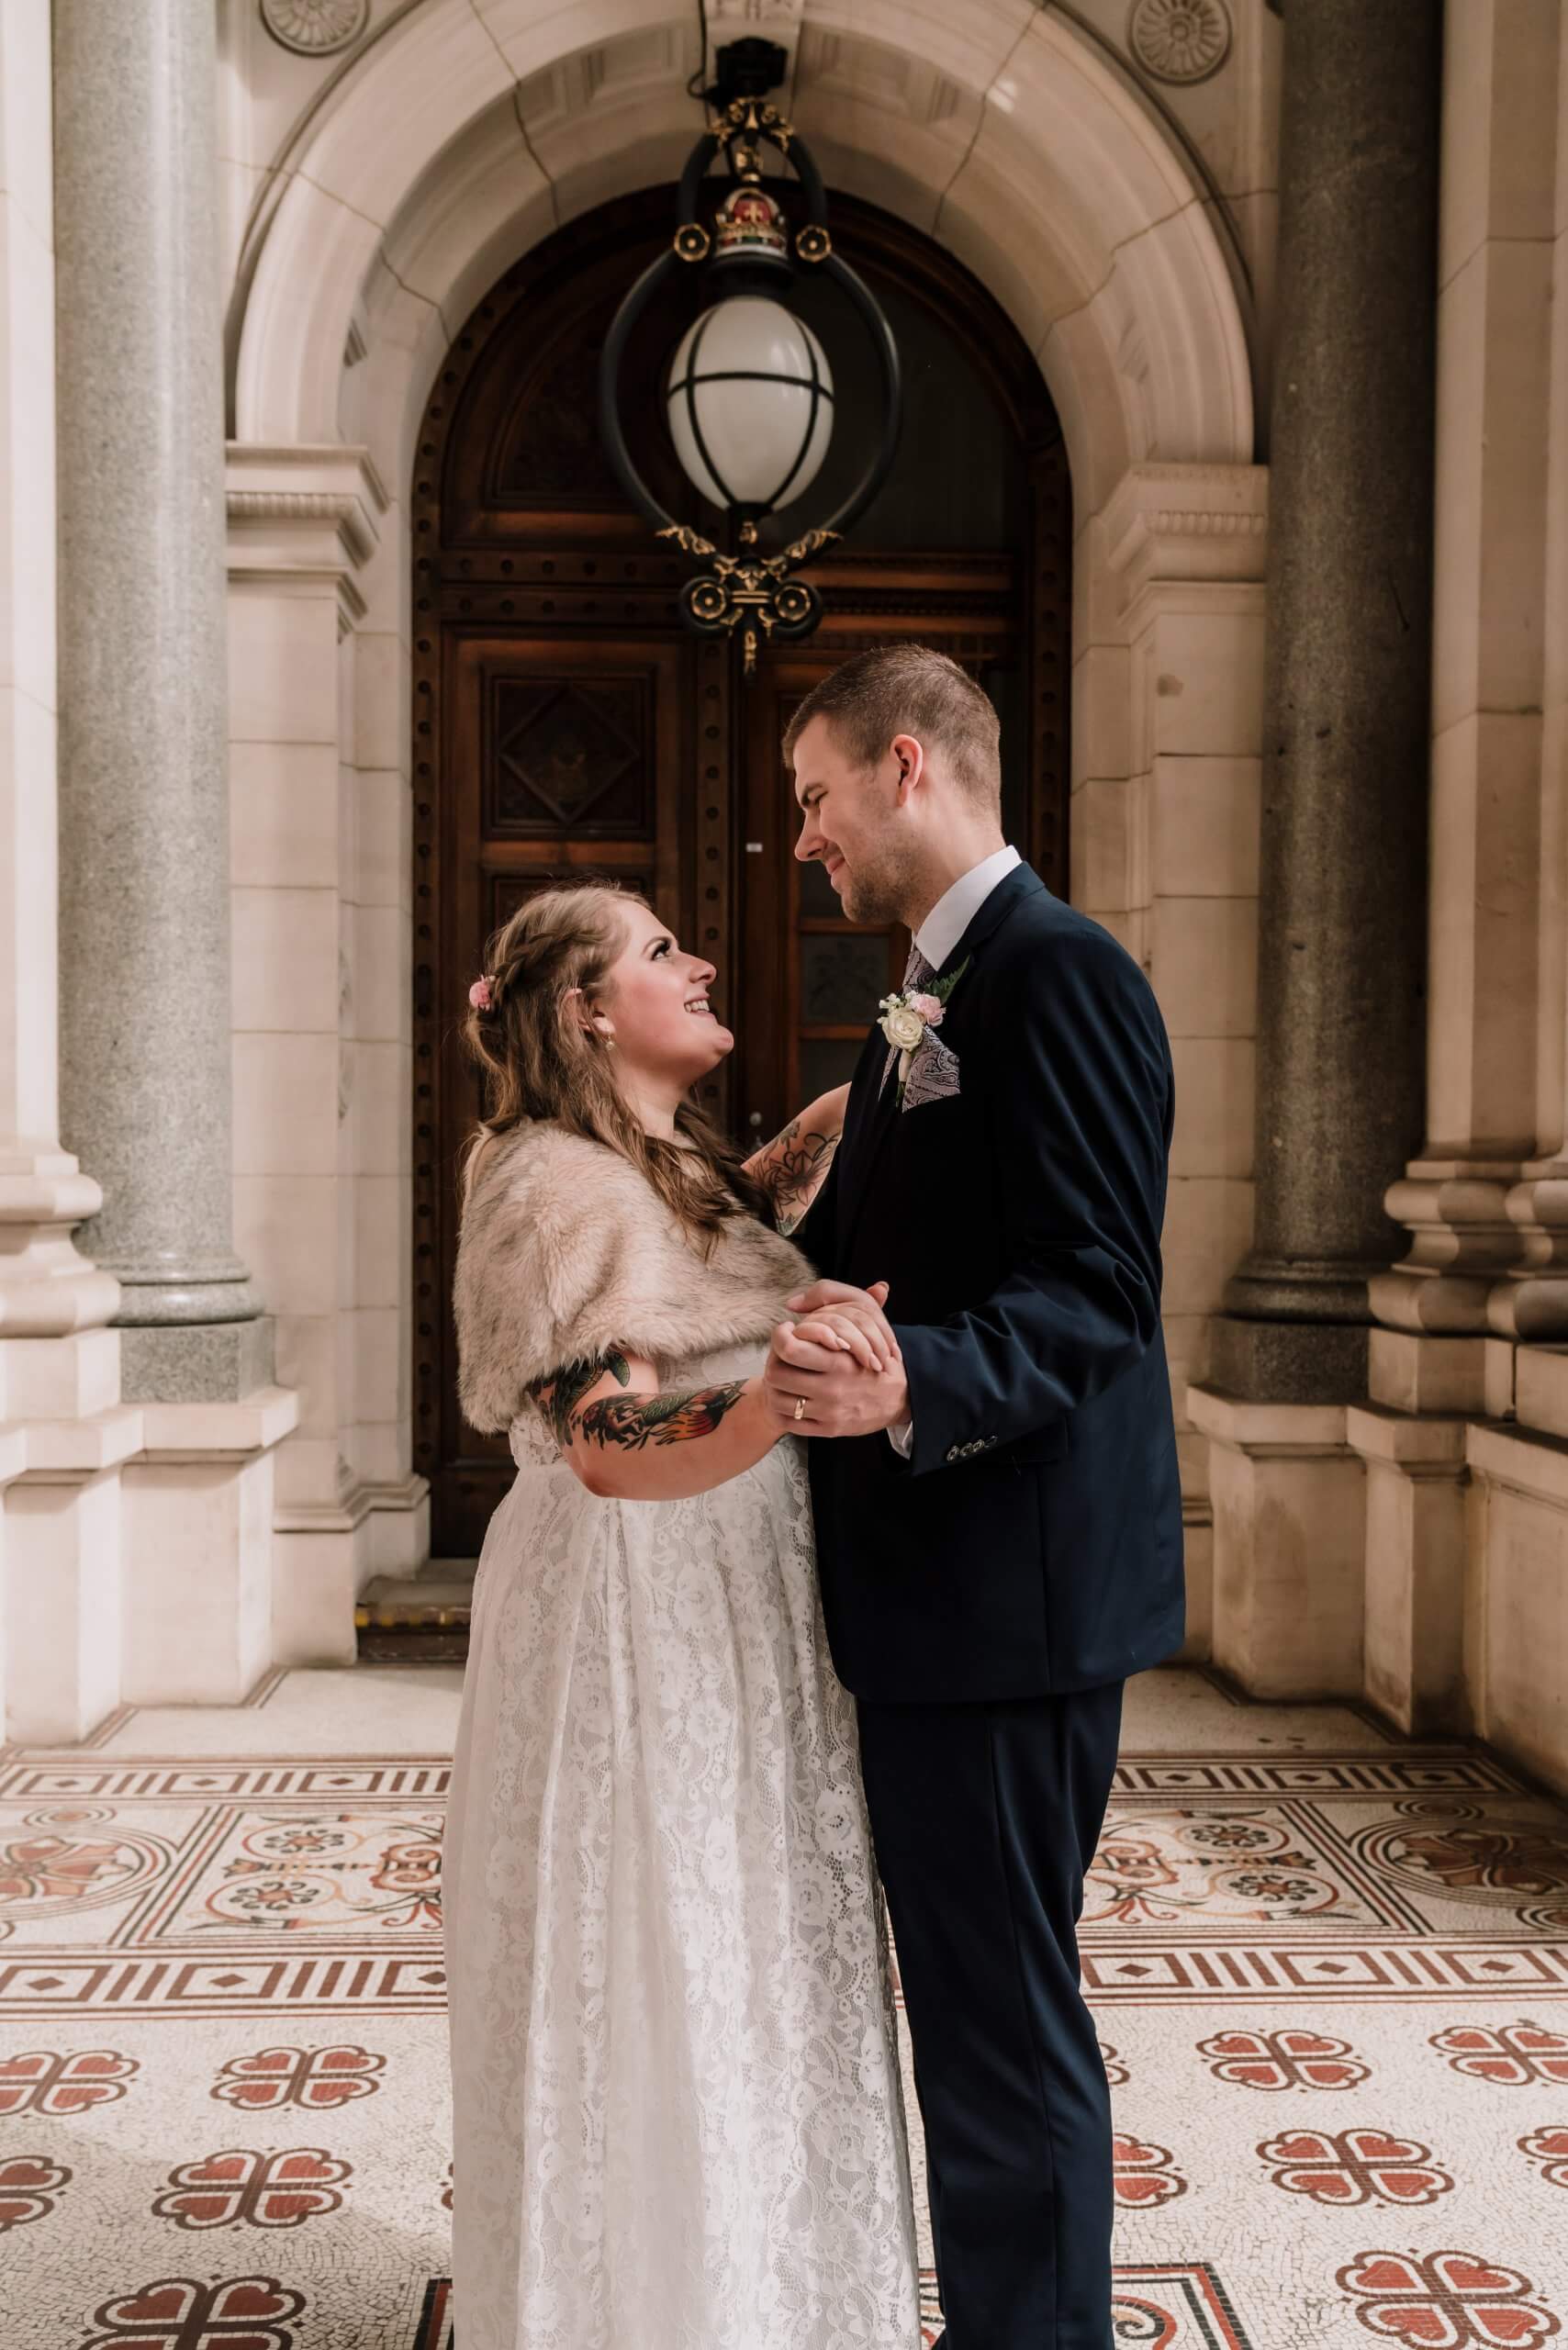 Narrative Portraiture - Bride and Groom slow dancing with each other in an ornate hallway